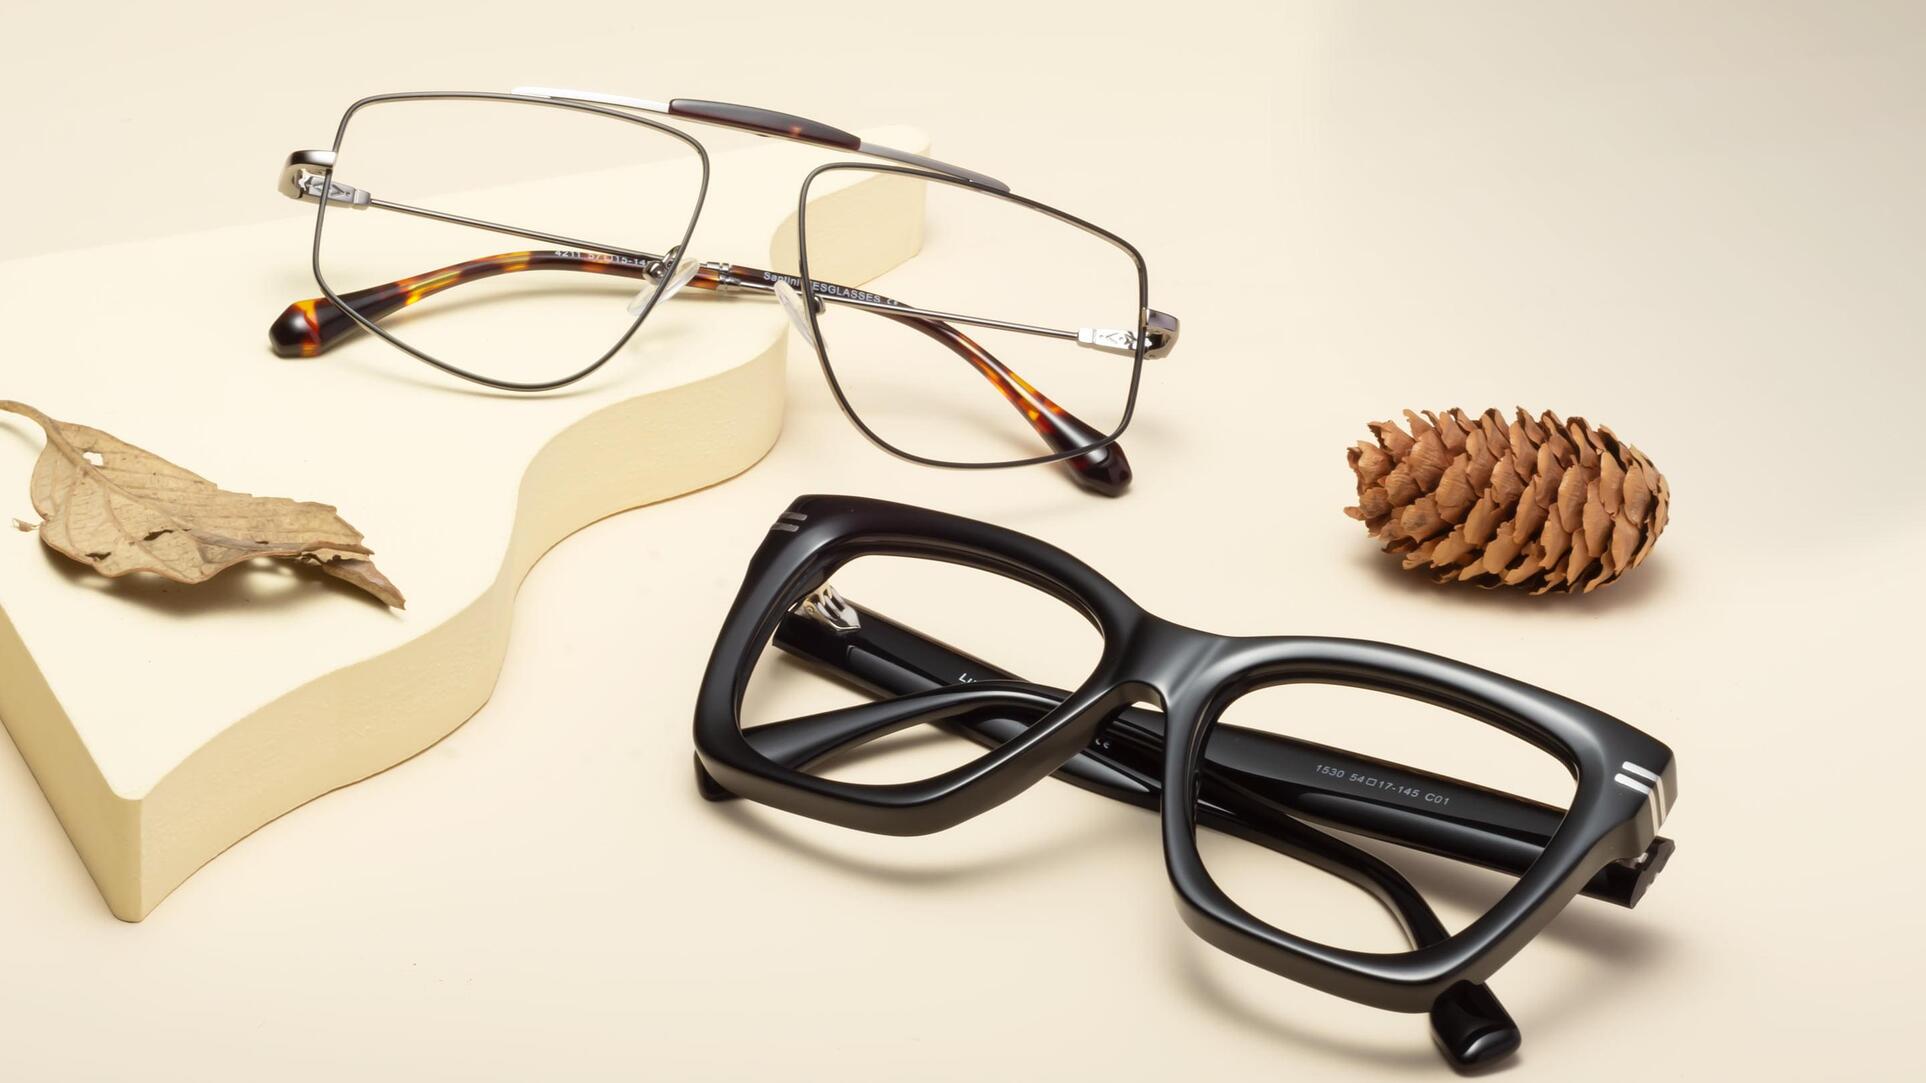 Bigger is better, oversized frames are back in style.